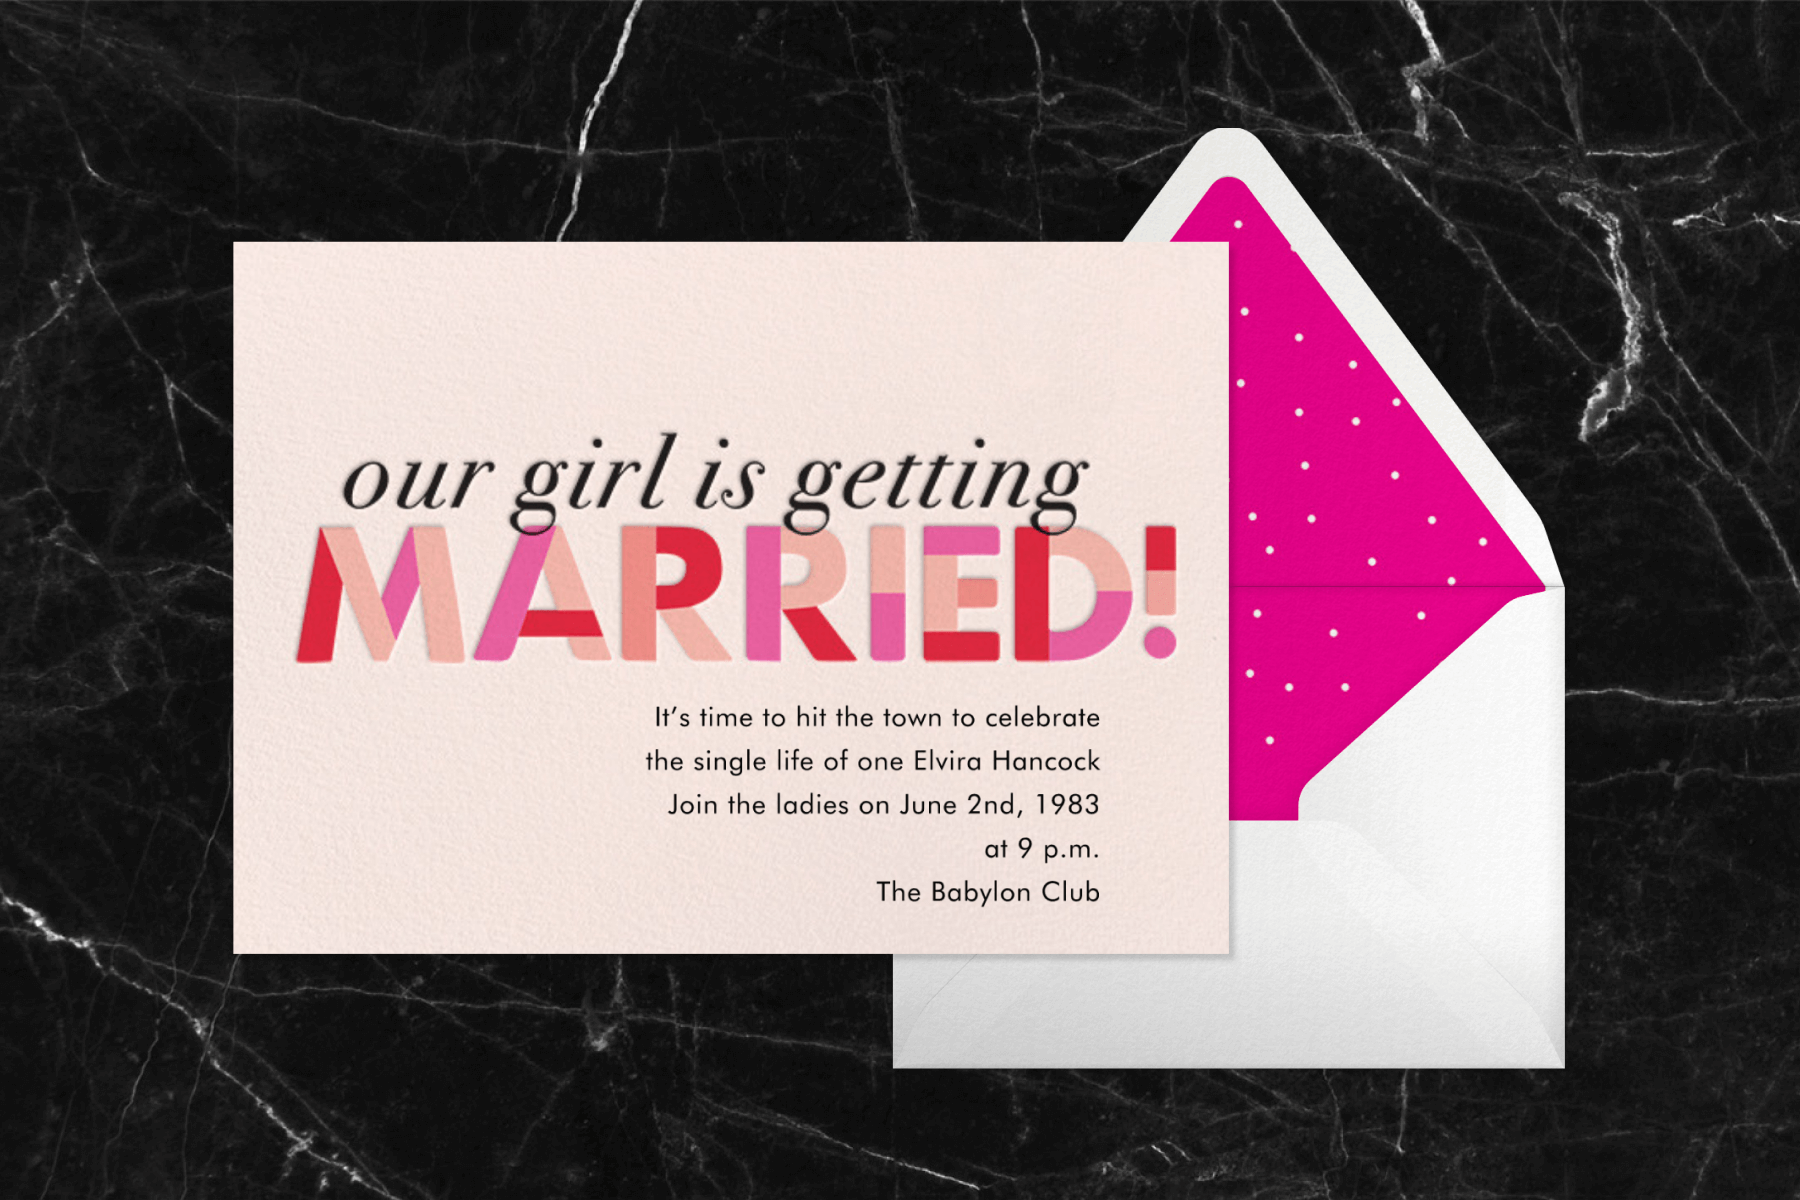 A light pink bachelorette party invitation with “our girl is getting MARRIED!” in pink and red color blocks beside a white envelope with a hot pink polka dot liner.